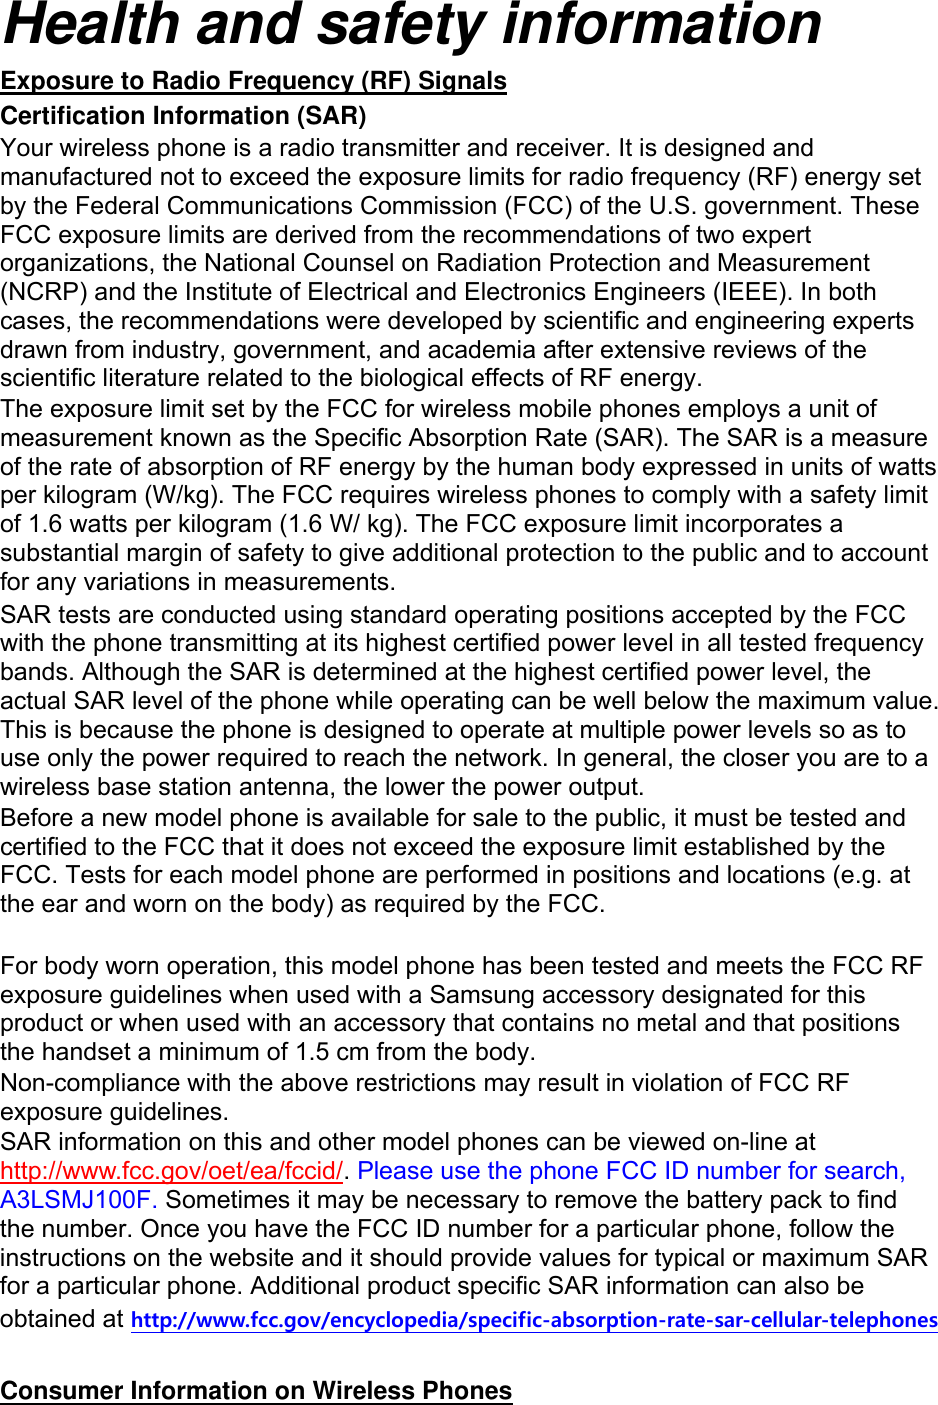 Health and safety information Exposure to Radio Frequency (RF) Signals Certification Information (SAR) Your wireless phone is a radio transmitter and receiver. It is designed and manufactured not to exceed the exposure limits for radio frequency (RF) energy set by the Federal Communications Commission (FCC) of the U.S. government. These FCC exposure limits are derived from the recommendations of two expert organizations, the National Counsel on Radiation Protection and Measurement (NCRP) and the Institute of Electrical and Electronics Engineers (IEEE). In both cases, the recommendations were developed by scientific and engineering experts drawn from industry, government, and academia after extensive reviews of the scientific literature related to the biological effects of RF energy. The exposure limit set by the FCC for wireless mobile phones employs a unit of measurement known as the Specific Absorption Rate (SAR). The SAR is a measure of the rate of absorption of RF energy by the human body expressed in units of watts per kilogram (W/kg). The FCC requires wireless phones to comply with a safety limit of 1.6 watts per kilogram (1.6 W/ kg). The FCC exposure limit incorporates a substantial margin of safety to give additional protection to the public and to account for any variations in measurements. SAR tests are conducted using standard operating positions accepted by the FCC with the phone transmitting at its highest certified power level in all tested frequency bands. Although the SAR is determined at the highest certified power level, the actual SAR level of the phone while operating can be well below the maximum value. This is because the phone is designed to operate at multiple power levels so as to use only the power required to reach the network. In general, the closer you are to a wireless base station antenna, the lower the power output. Before a new model phone is available for sale to the public, it must be tested and certified to the FCC that it does not exceed the exposure limit established by the FCC. Tests for each model phone are performed in positions and locations (e.g. at the ear and worn on the body) as required by the FCC.      For body worn operation, this model phone has been tested and meets the FCC RF exposure guidelines when used with a Samsung accessory designated for this product or when used with an accessory that contains no metal and that positions the handset a minimum of 1.5 cm from the body.   Non-compliance with the above restrictions may result in violation of FCC RF exposure guidelines. SAR information on this and other model phones can be viewed on-line at http://www.fcc.gov/oet/ea/fccid/. Please use the phone FCC ID number for search, A3LSMJ100F. Sometimes it may be necessary to remove the battery pack to find the number. Once you have the FCC ID number for a particular phone, follow the instructions on the website and it should provide values for typical or maximum SAR for a particular phone. Additional product specific SAR information can also be obtained at http://www.fcc.gov/encyclopedia/specific-absorption-rate-sar-cellular-telephones  Consumer Information on Wireless Phones 